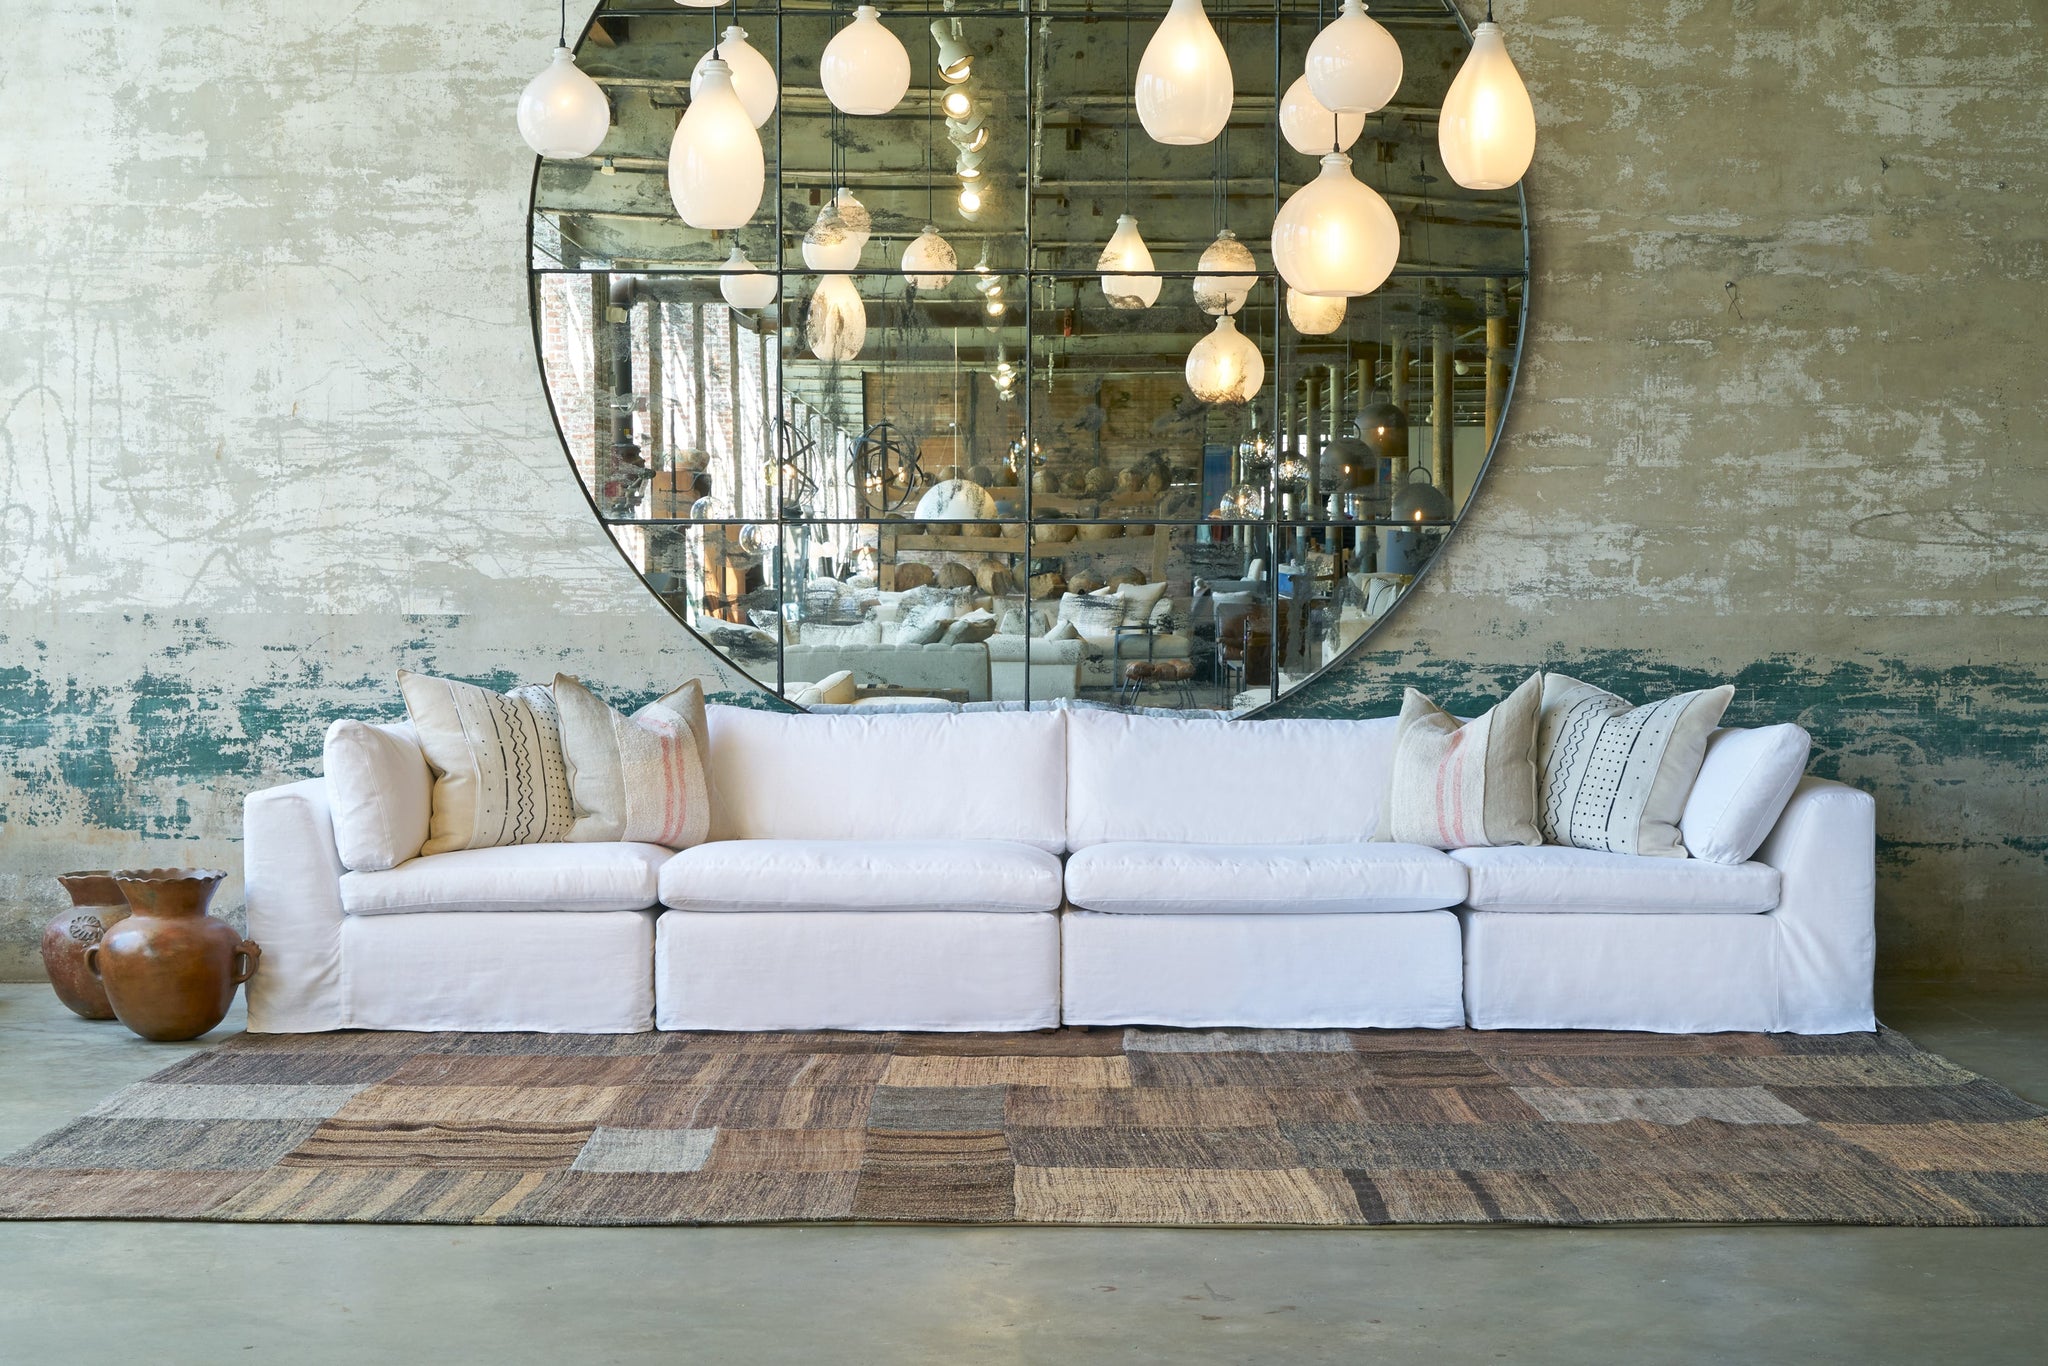  Large white slipcovered modular sofa in front of a large round mirror with white glass lighting pendants. Photographed in Otis White 